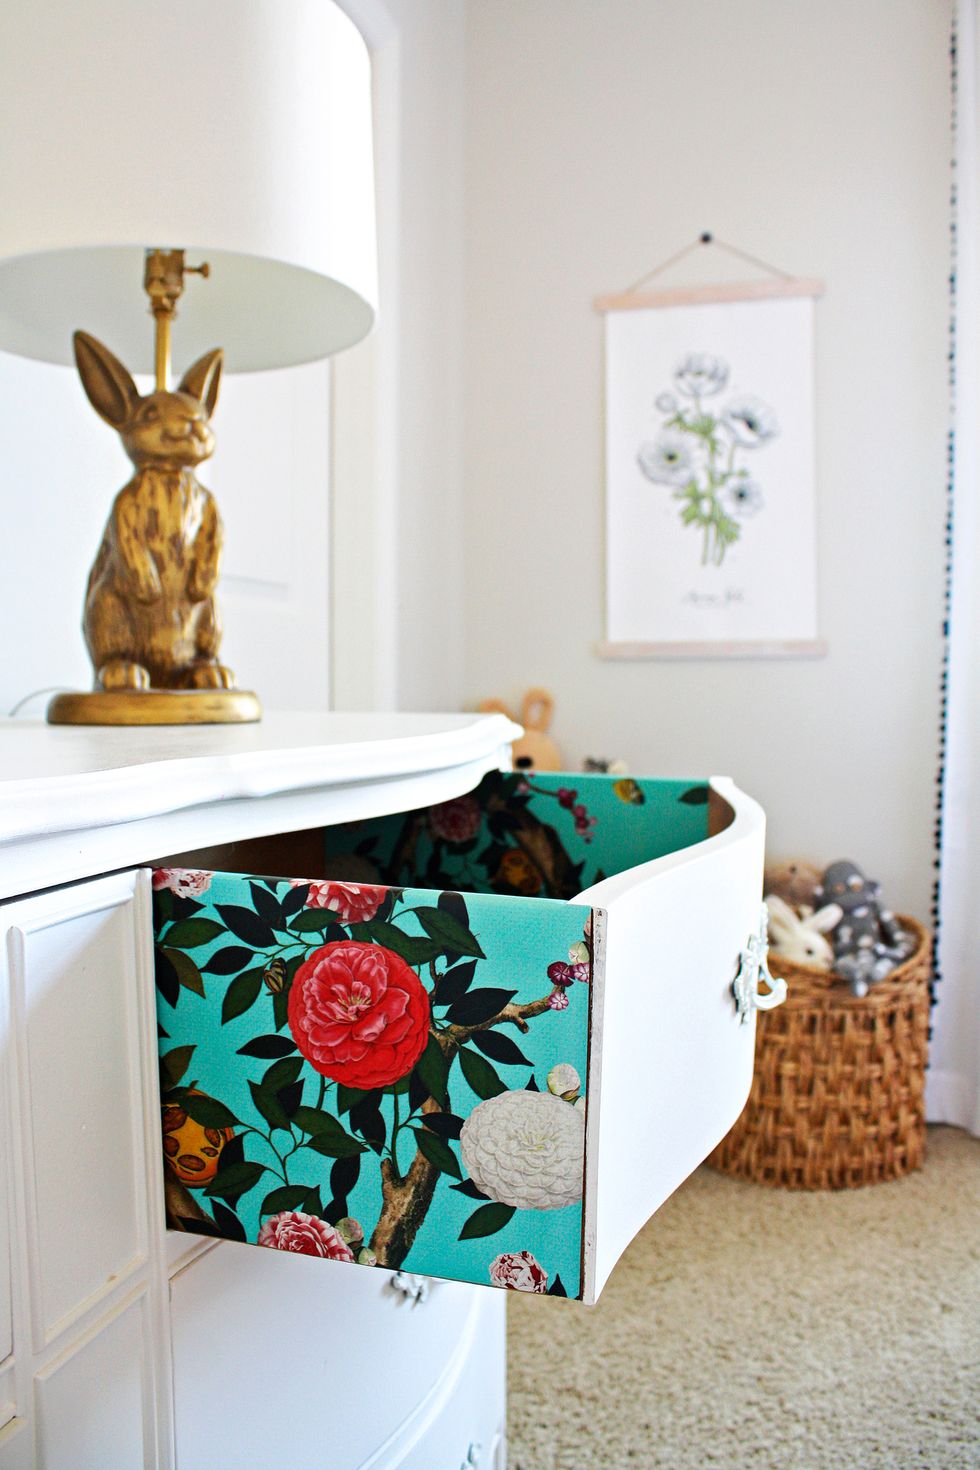 10 Best Contact Paper Decoration Ideas - Creative Ways to Use Removable  Wallpaper